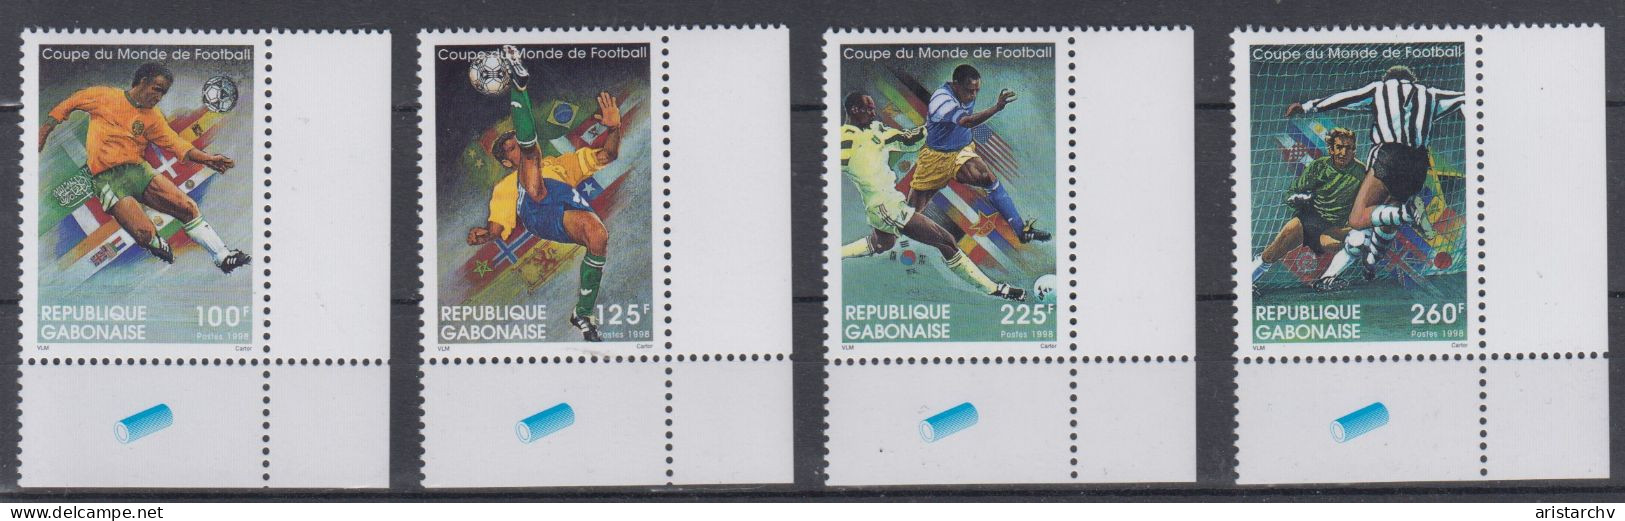 GABON 1998 FOOTBALL WORLD CUP S/SHEET AND 4 STAMPS - 1998 – Frankreich